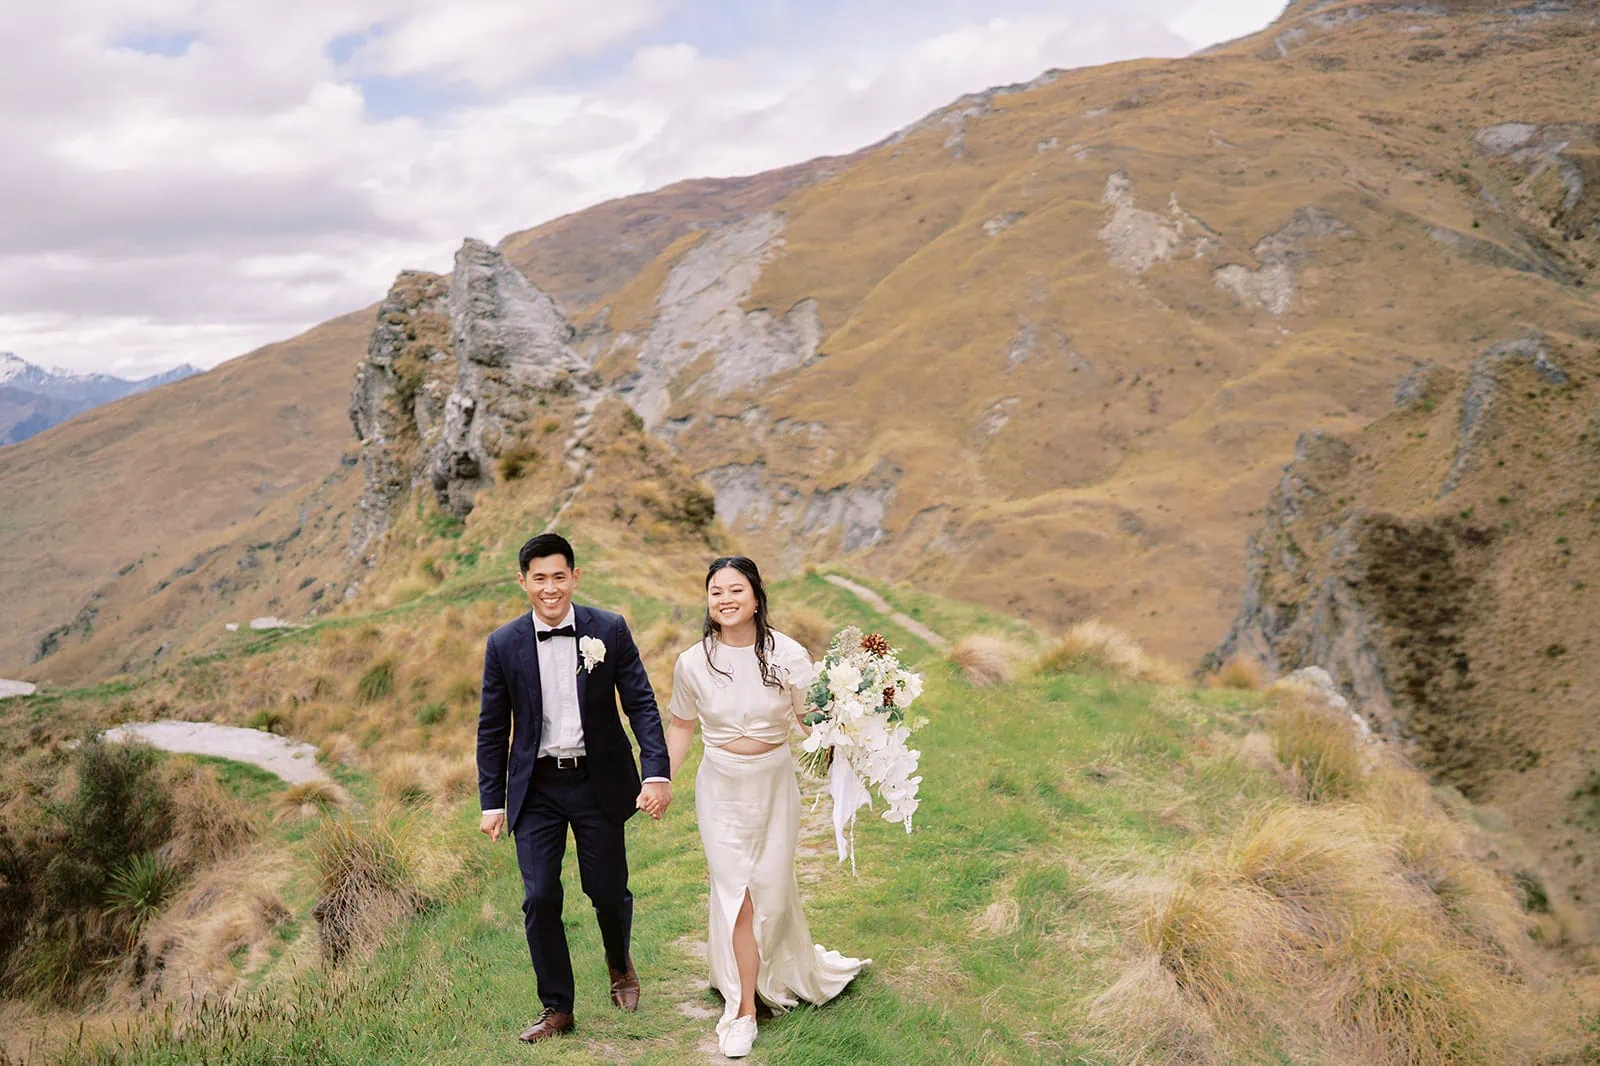 Queenstown Elopement Heli Wedding Photographer クイーンズタウン結婚式 | A couple holding hands and walking on a grassy hill for their pre-wedding photoshoot.